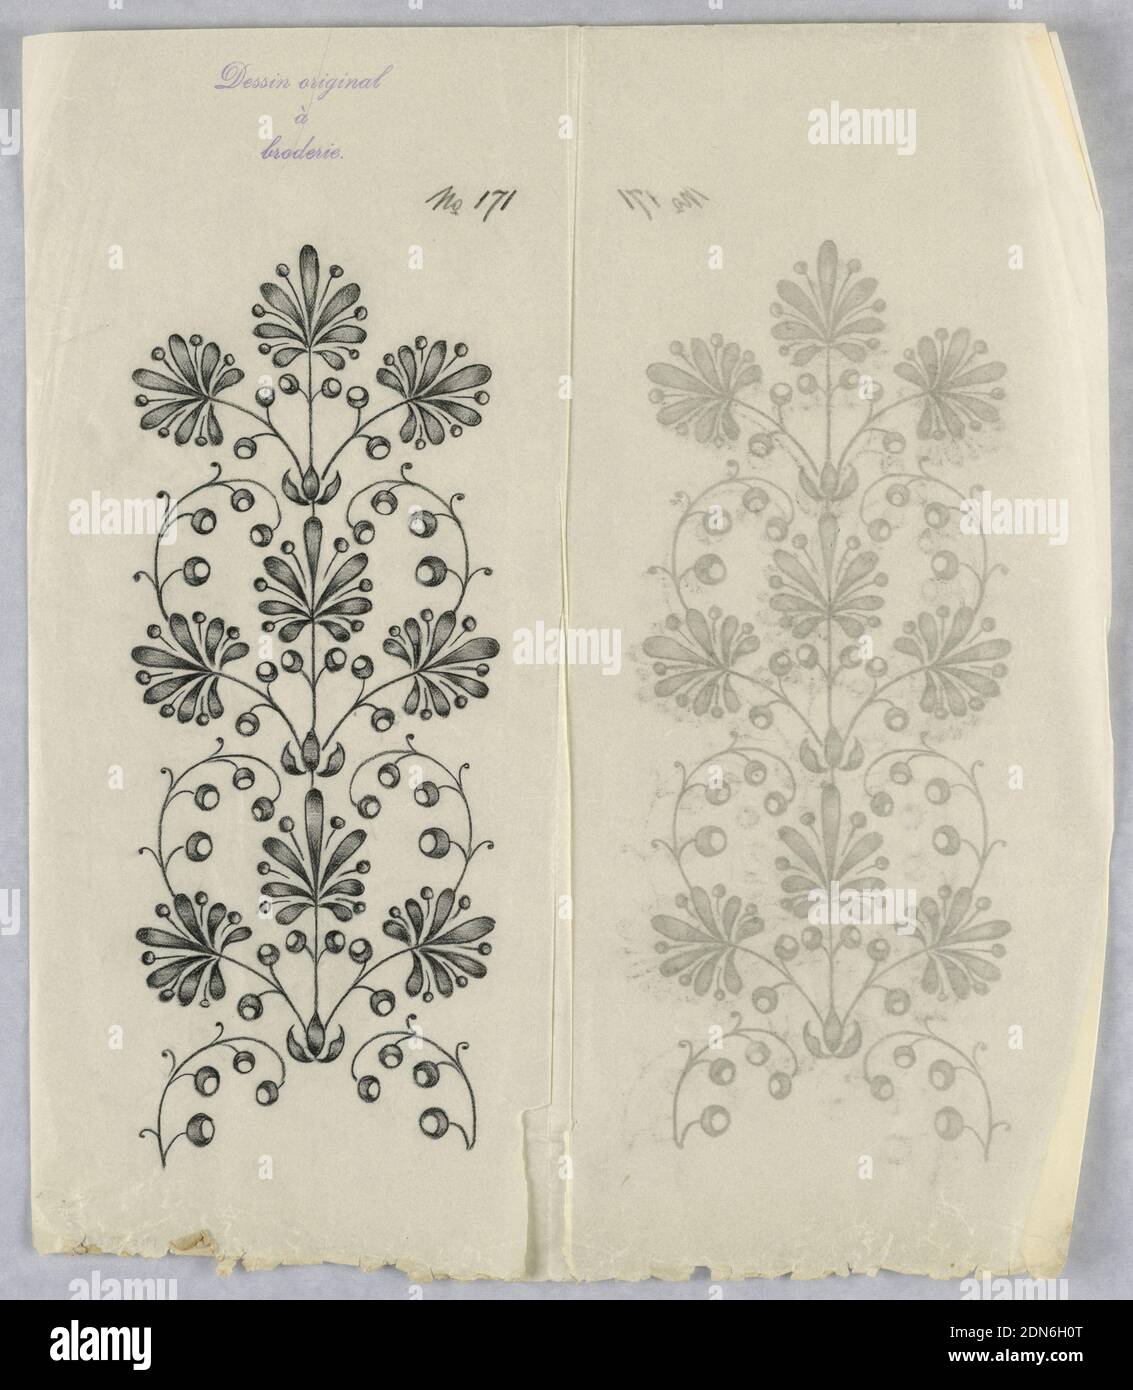 Designs for embroidery, Black crayon on tracing paper., Vertical rectangle.  Designs of abstract floral patterns for panels and borders. Each drawing  stamped at top: 'Dessin original a broderie.' Designs numbered 171 (J),